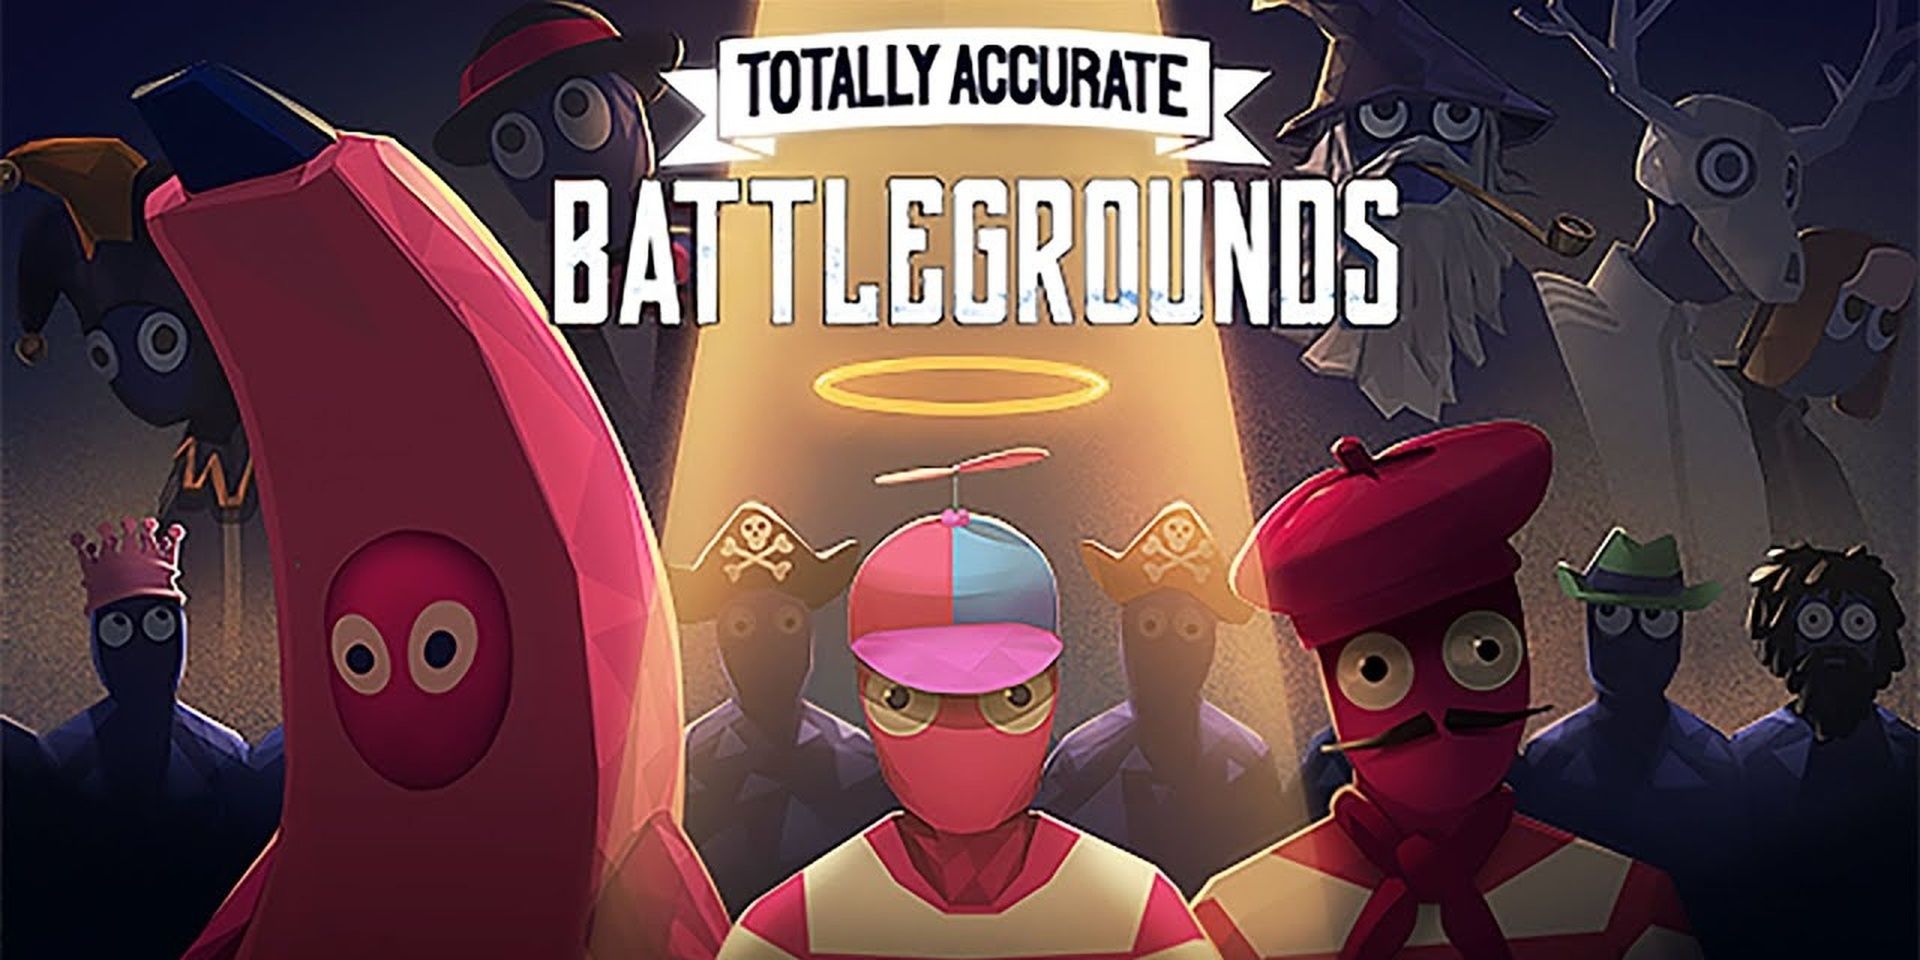 Totally Accurate Battlegrounds cover art 